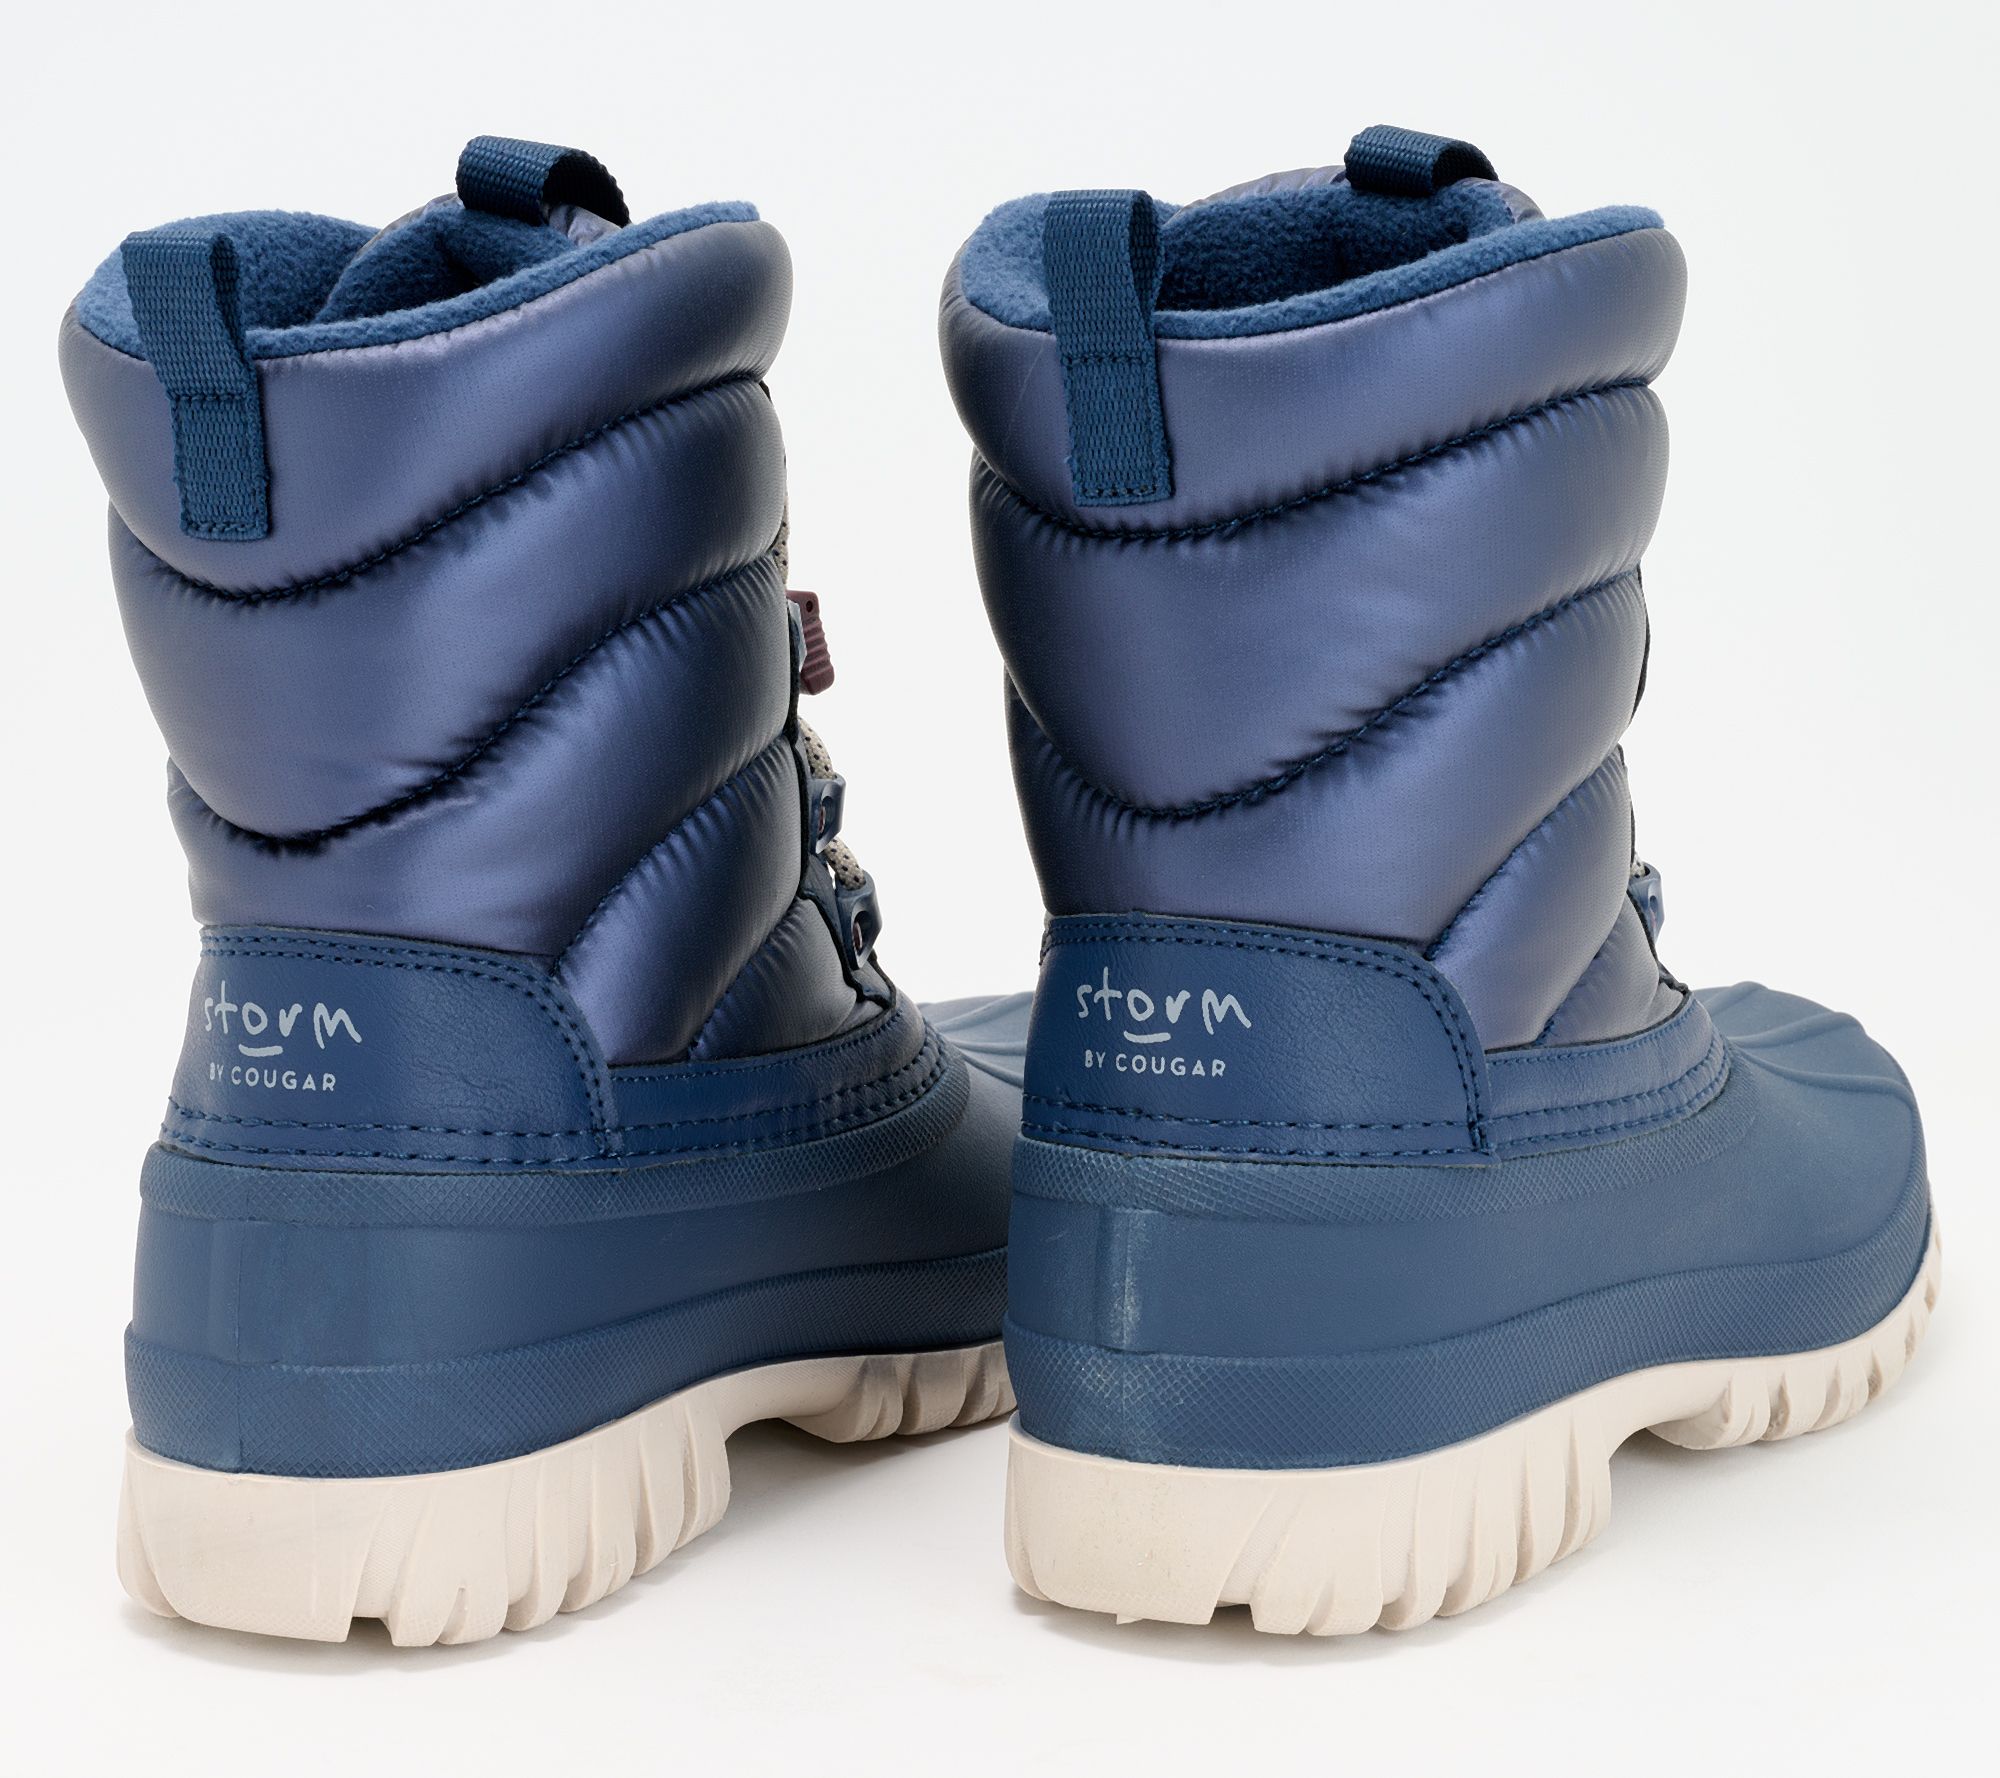 Cougar Waterproof Insulated Winter Boots - Cardiff - QVC.com